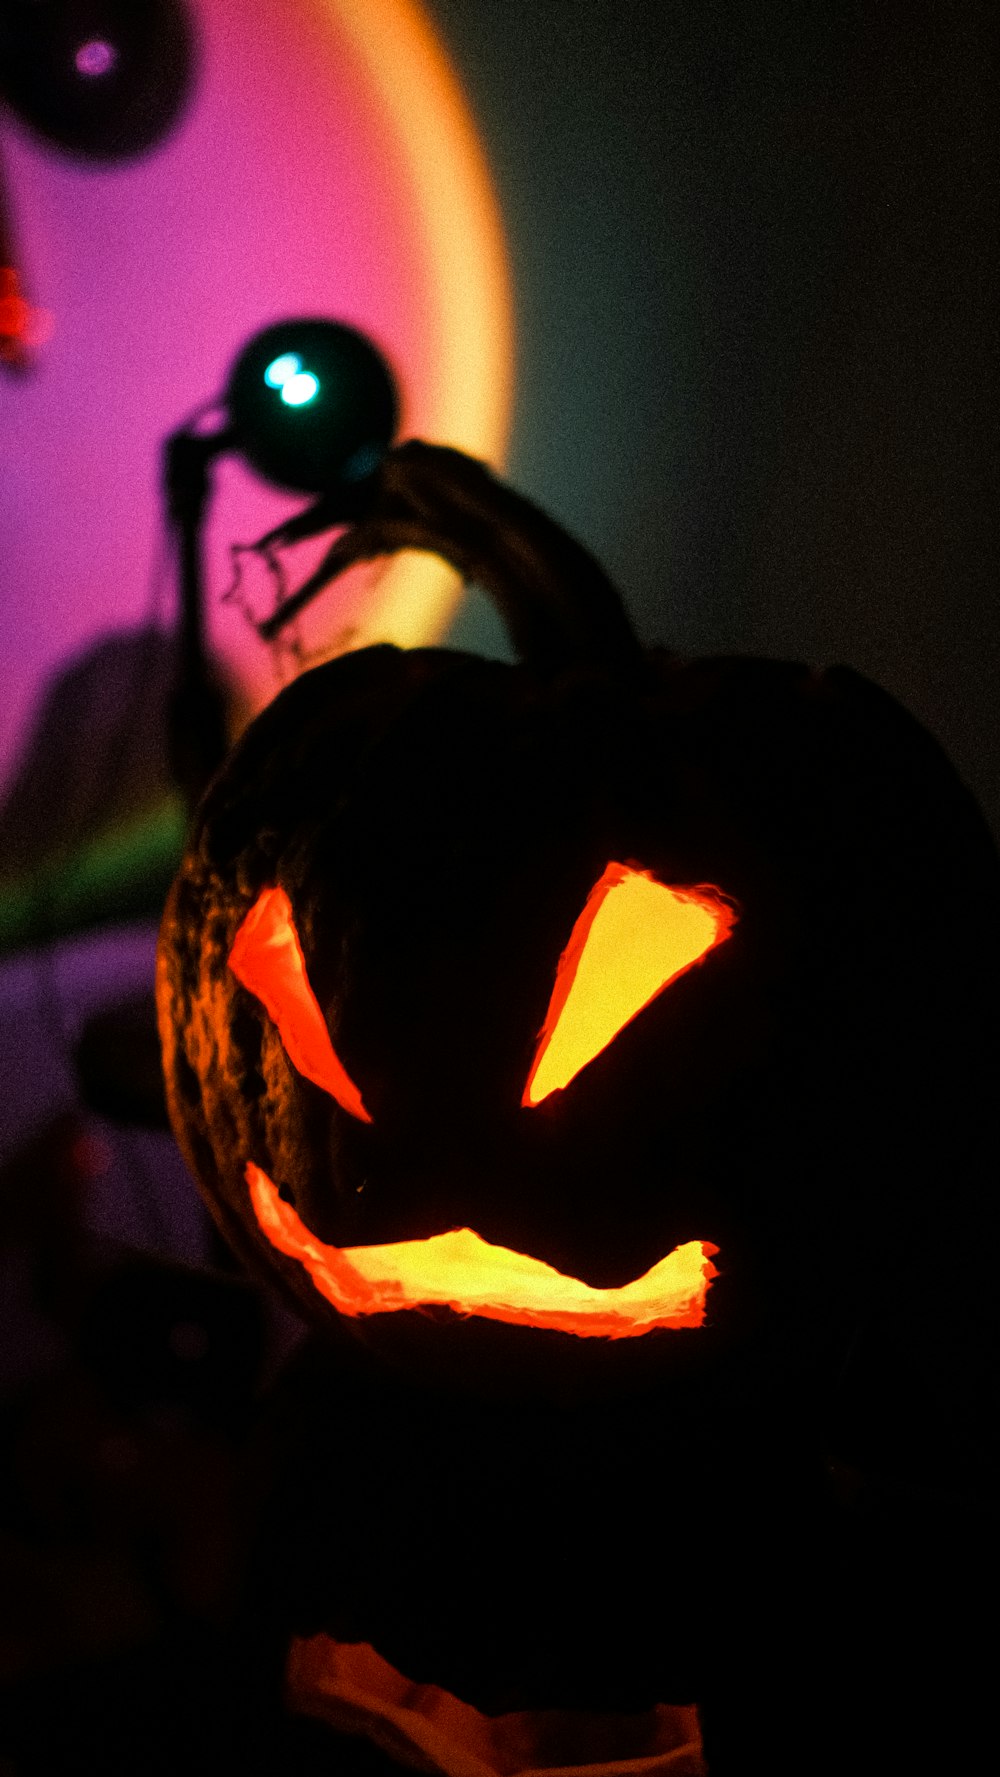 a carved pumpkin with glowing eyes in a dark room